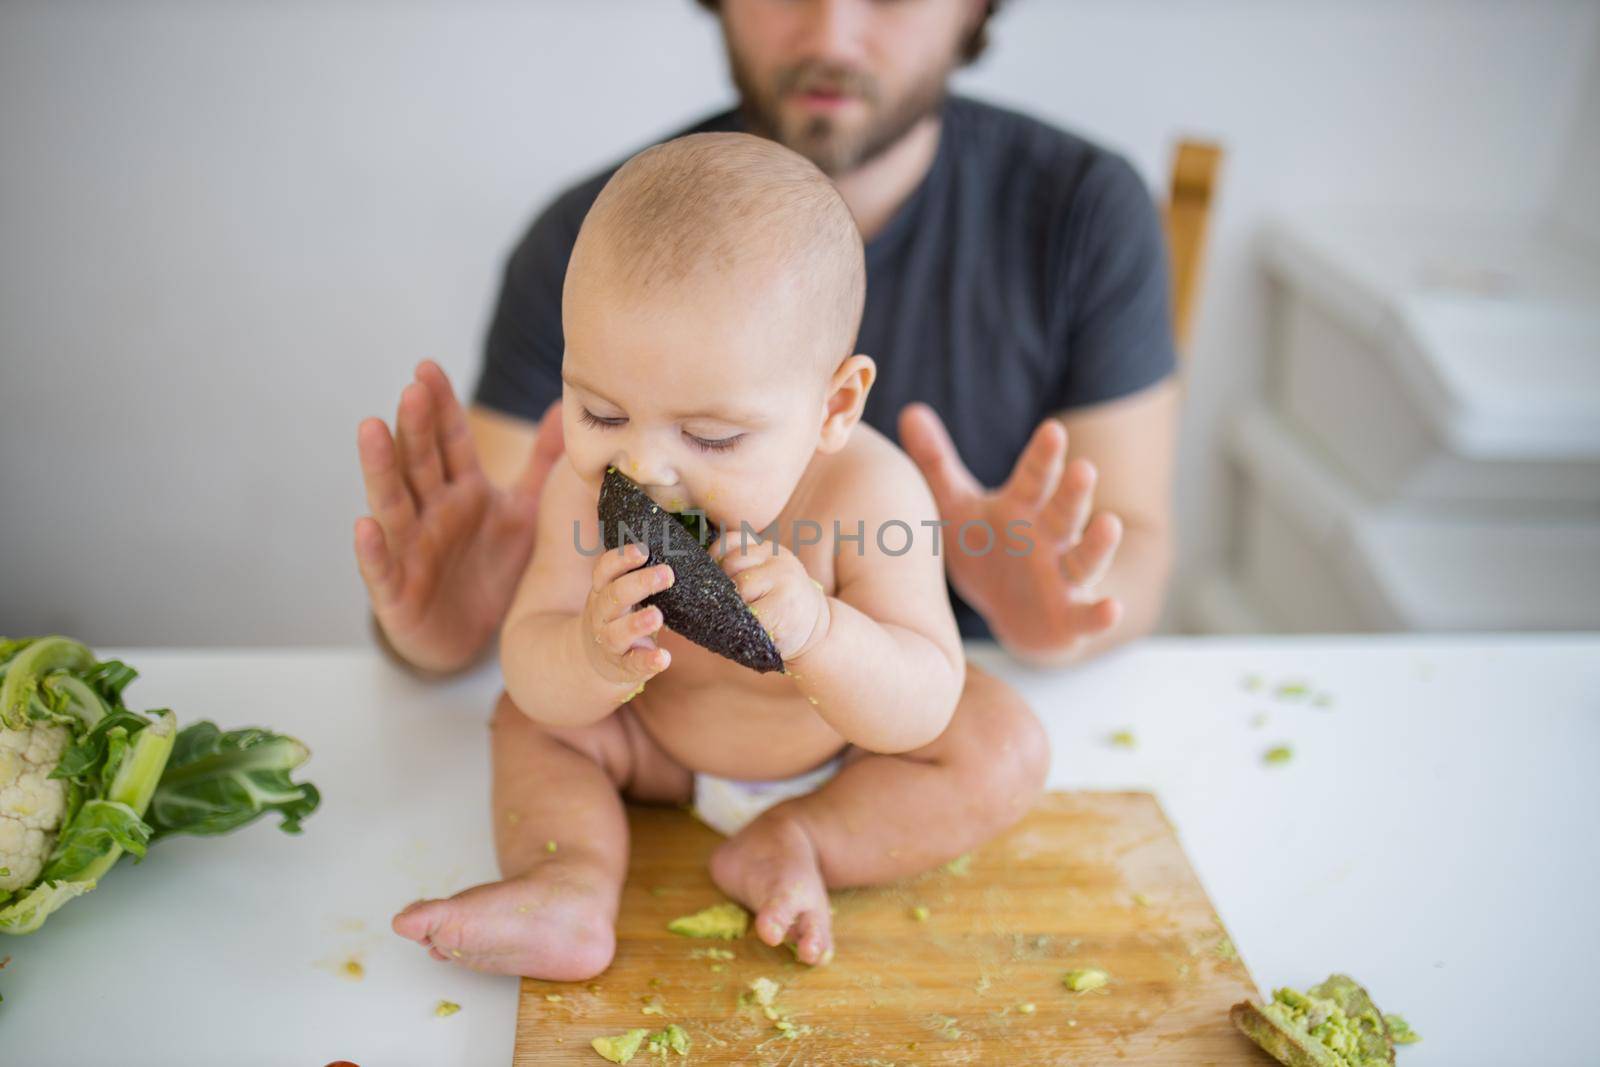 Happy baby sitting on a wooden board and biting an avocado peel by Kanelbulle